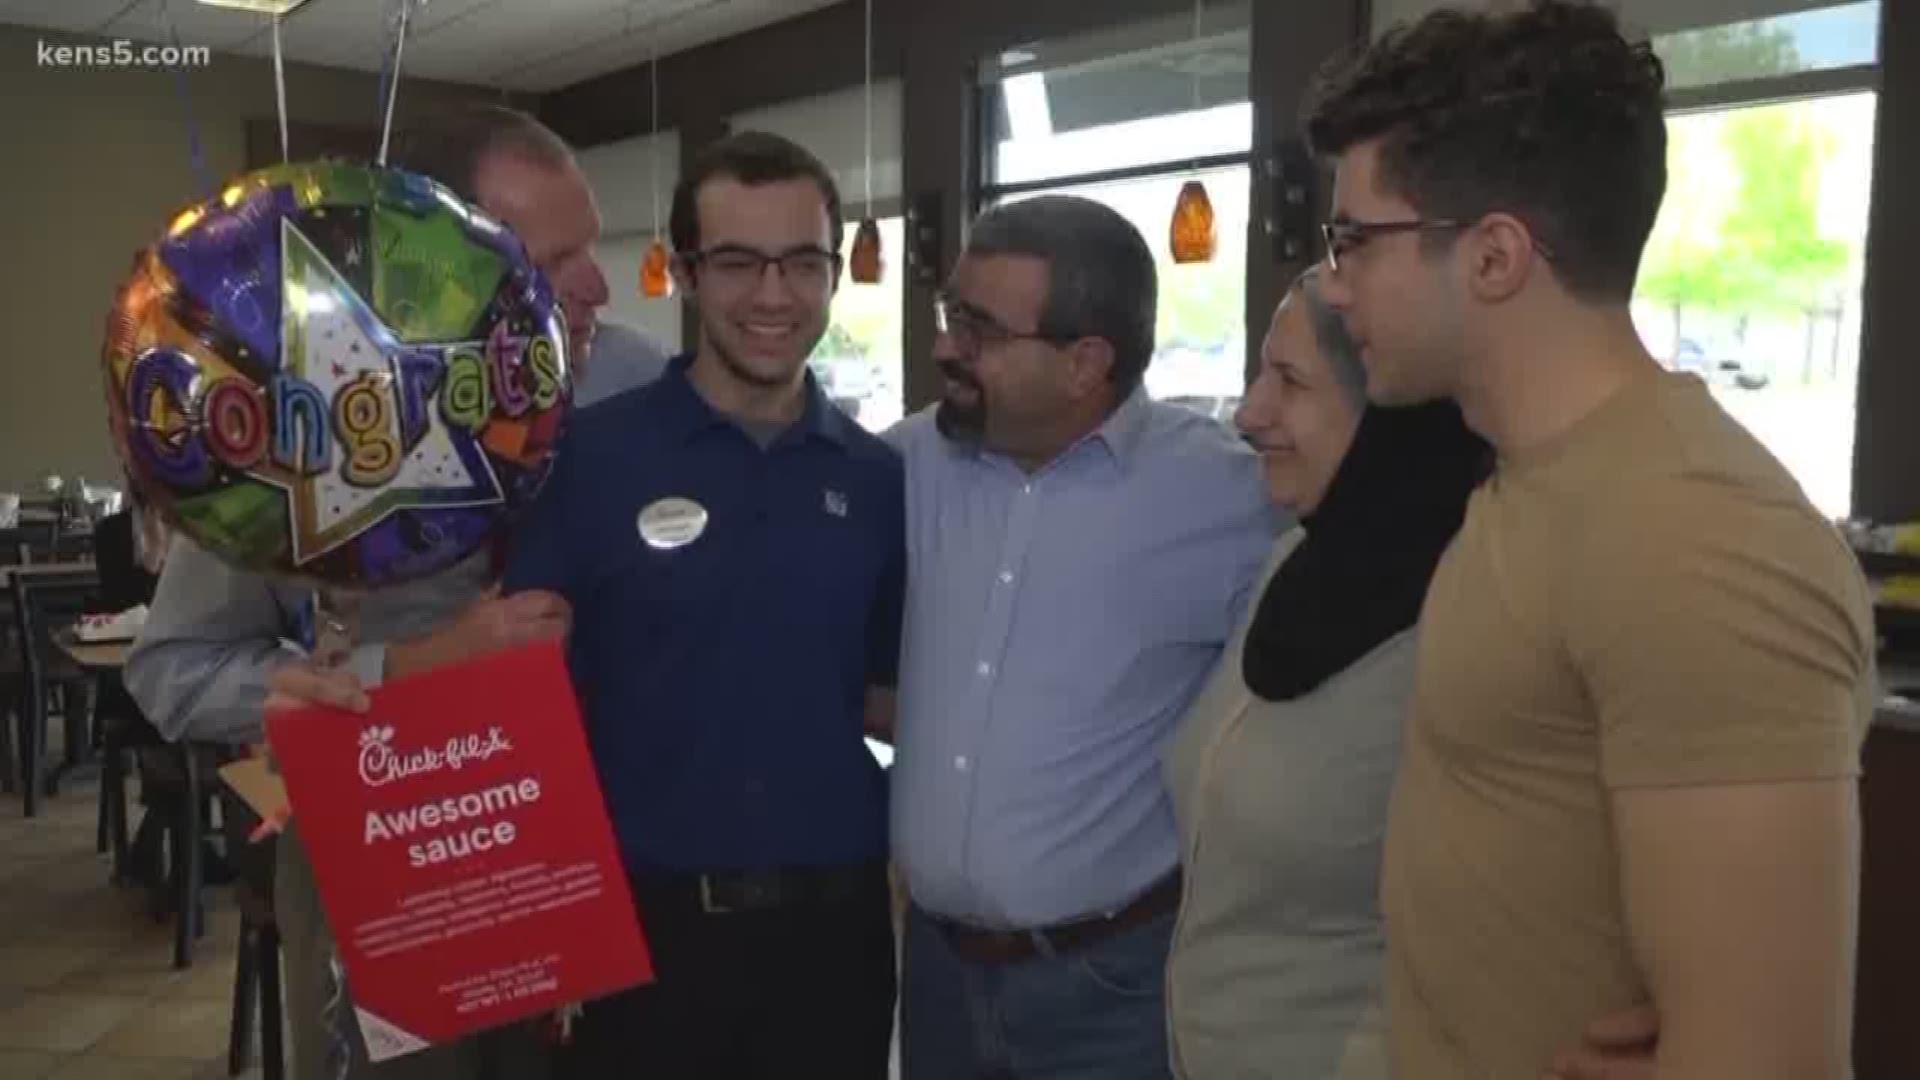 20-year-old Abdullah Alaboosi received the surprise of his life when he looked inside an 'Awesome Sauce' envelope. Eyewitness News reporter Ashley Speller has the story.